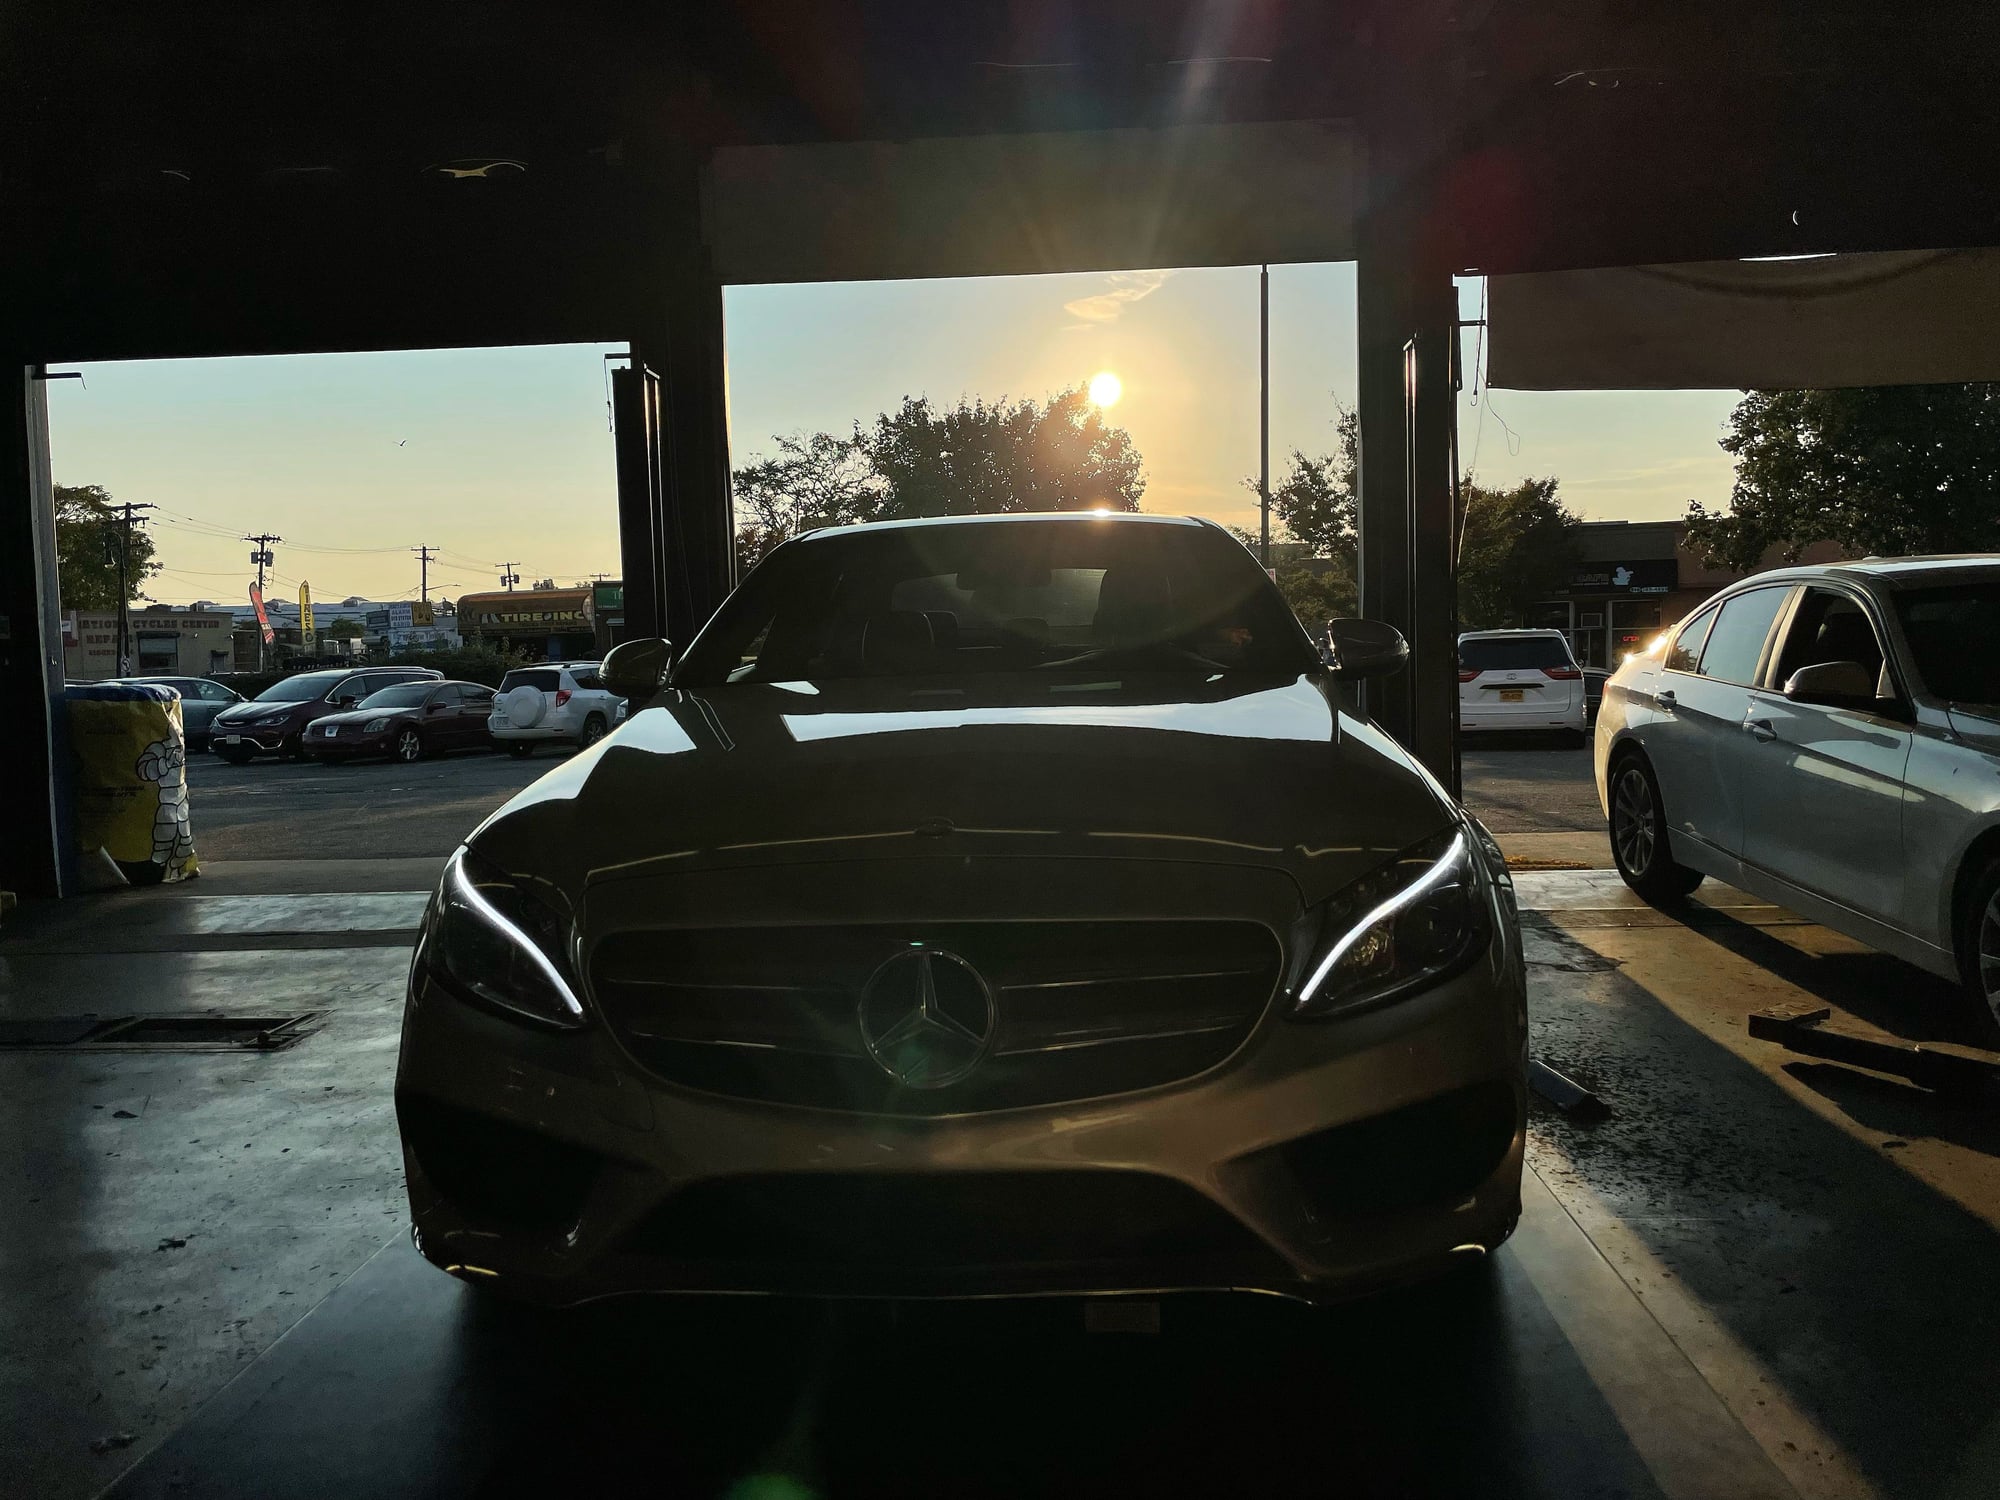 c350e - Towing - Any thoughts ? -  Forums